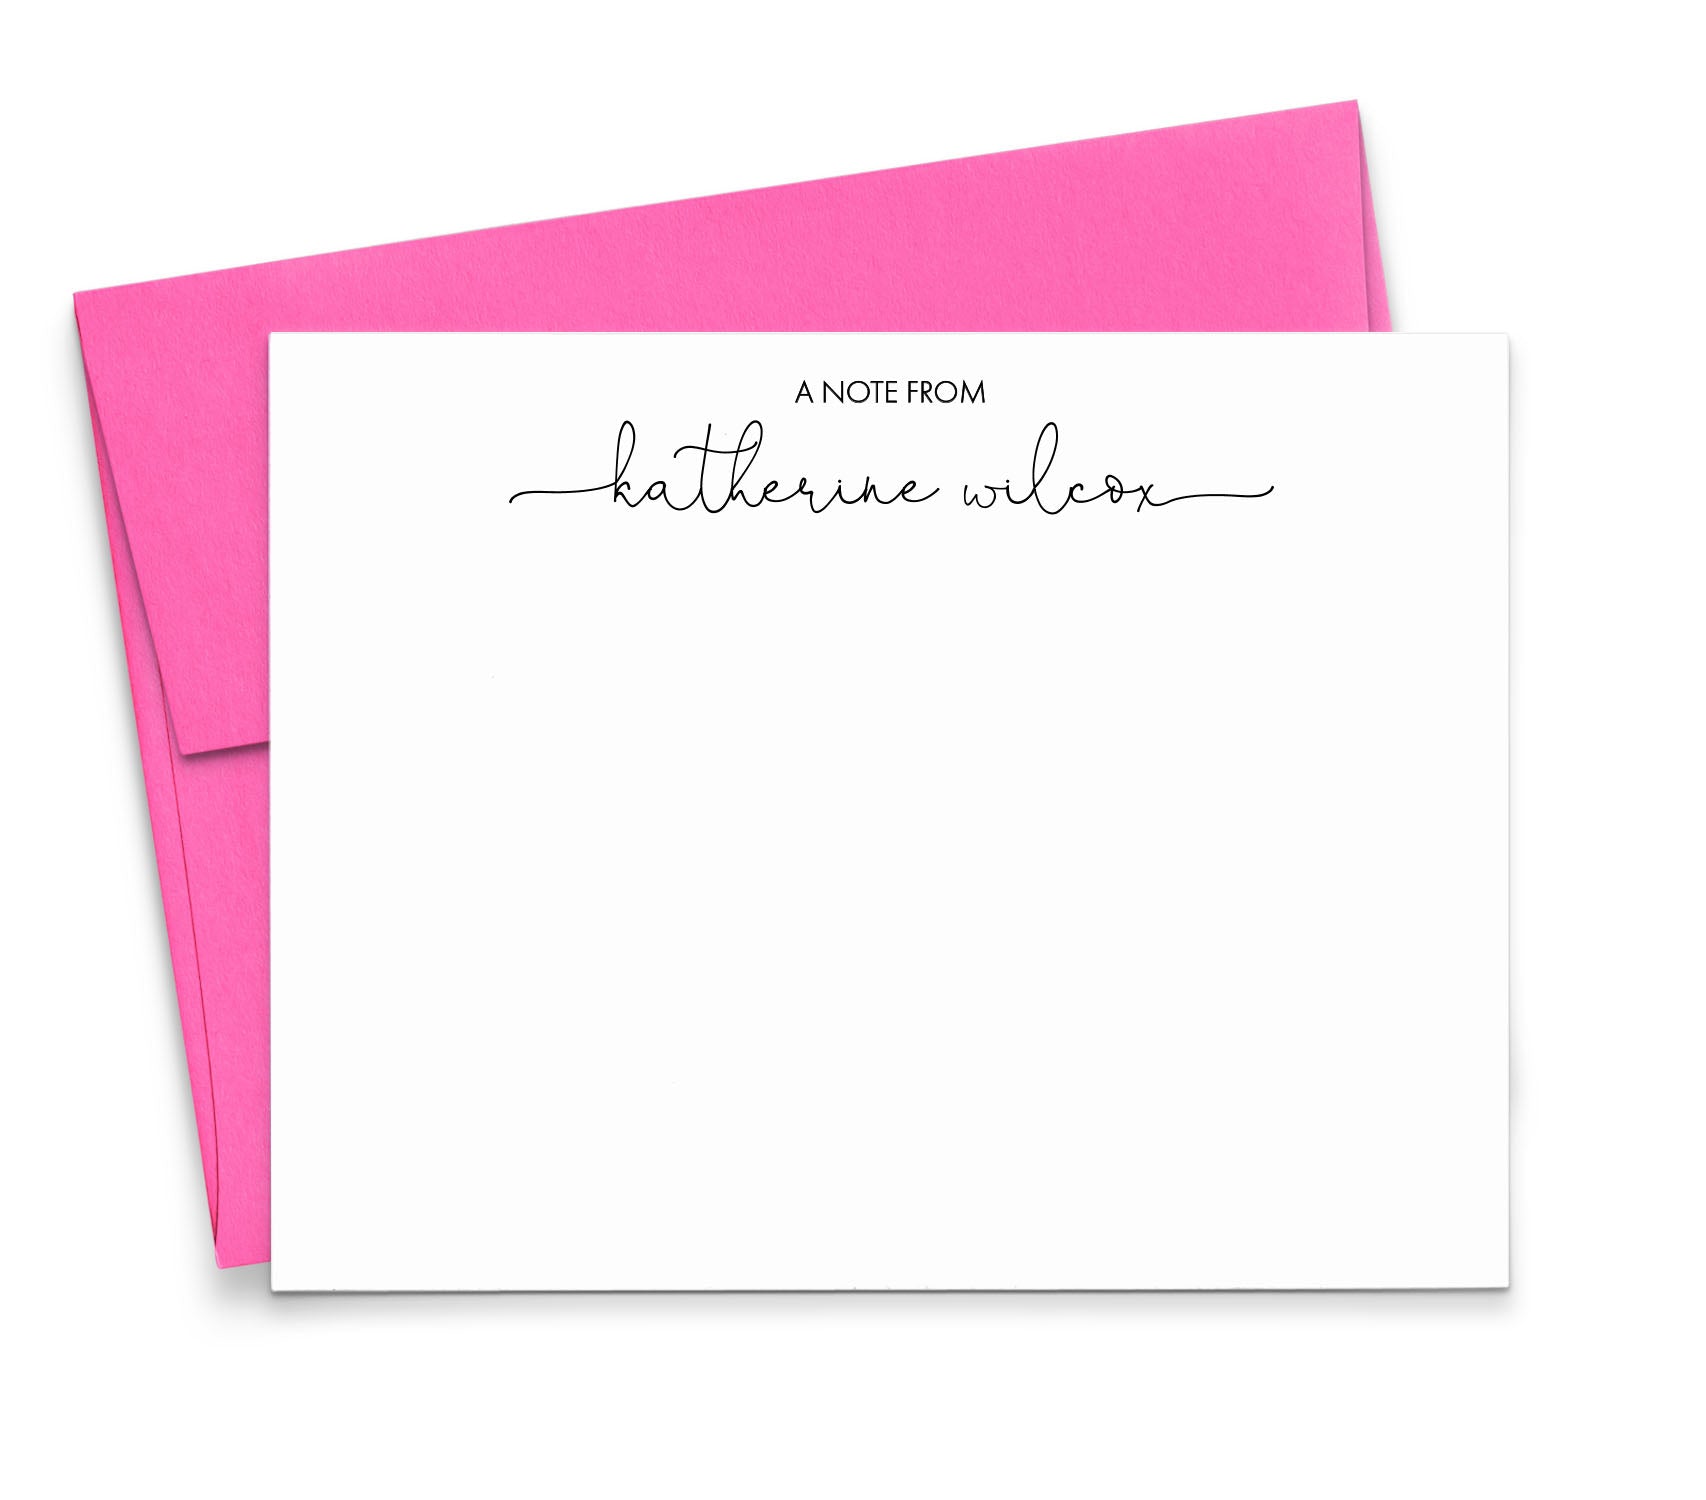 Personalized Stationery Sets